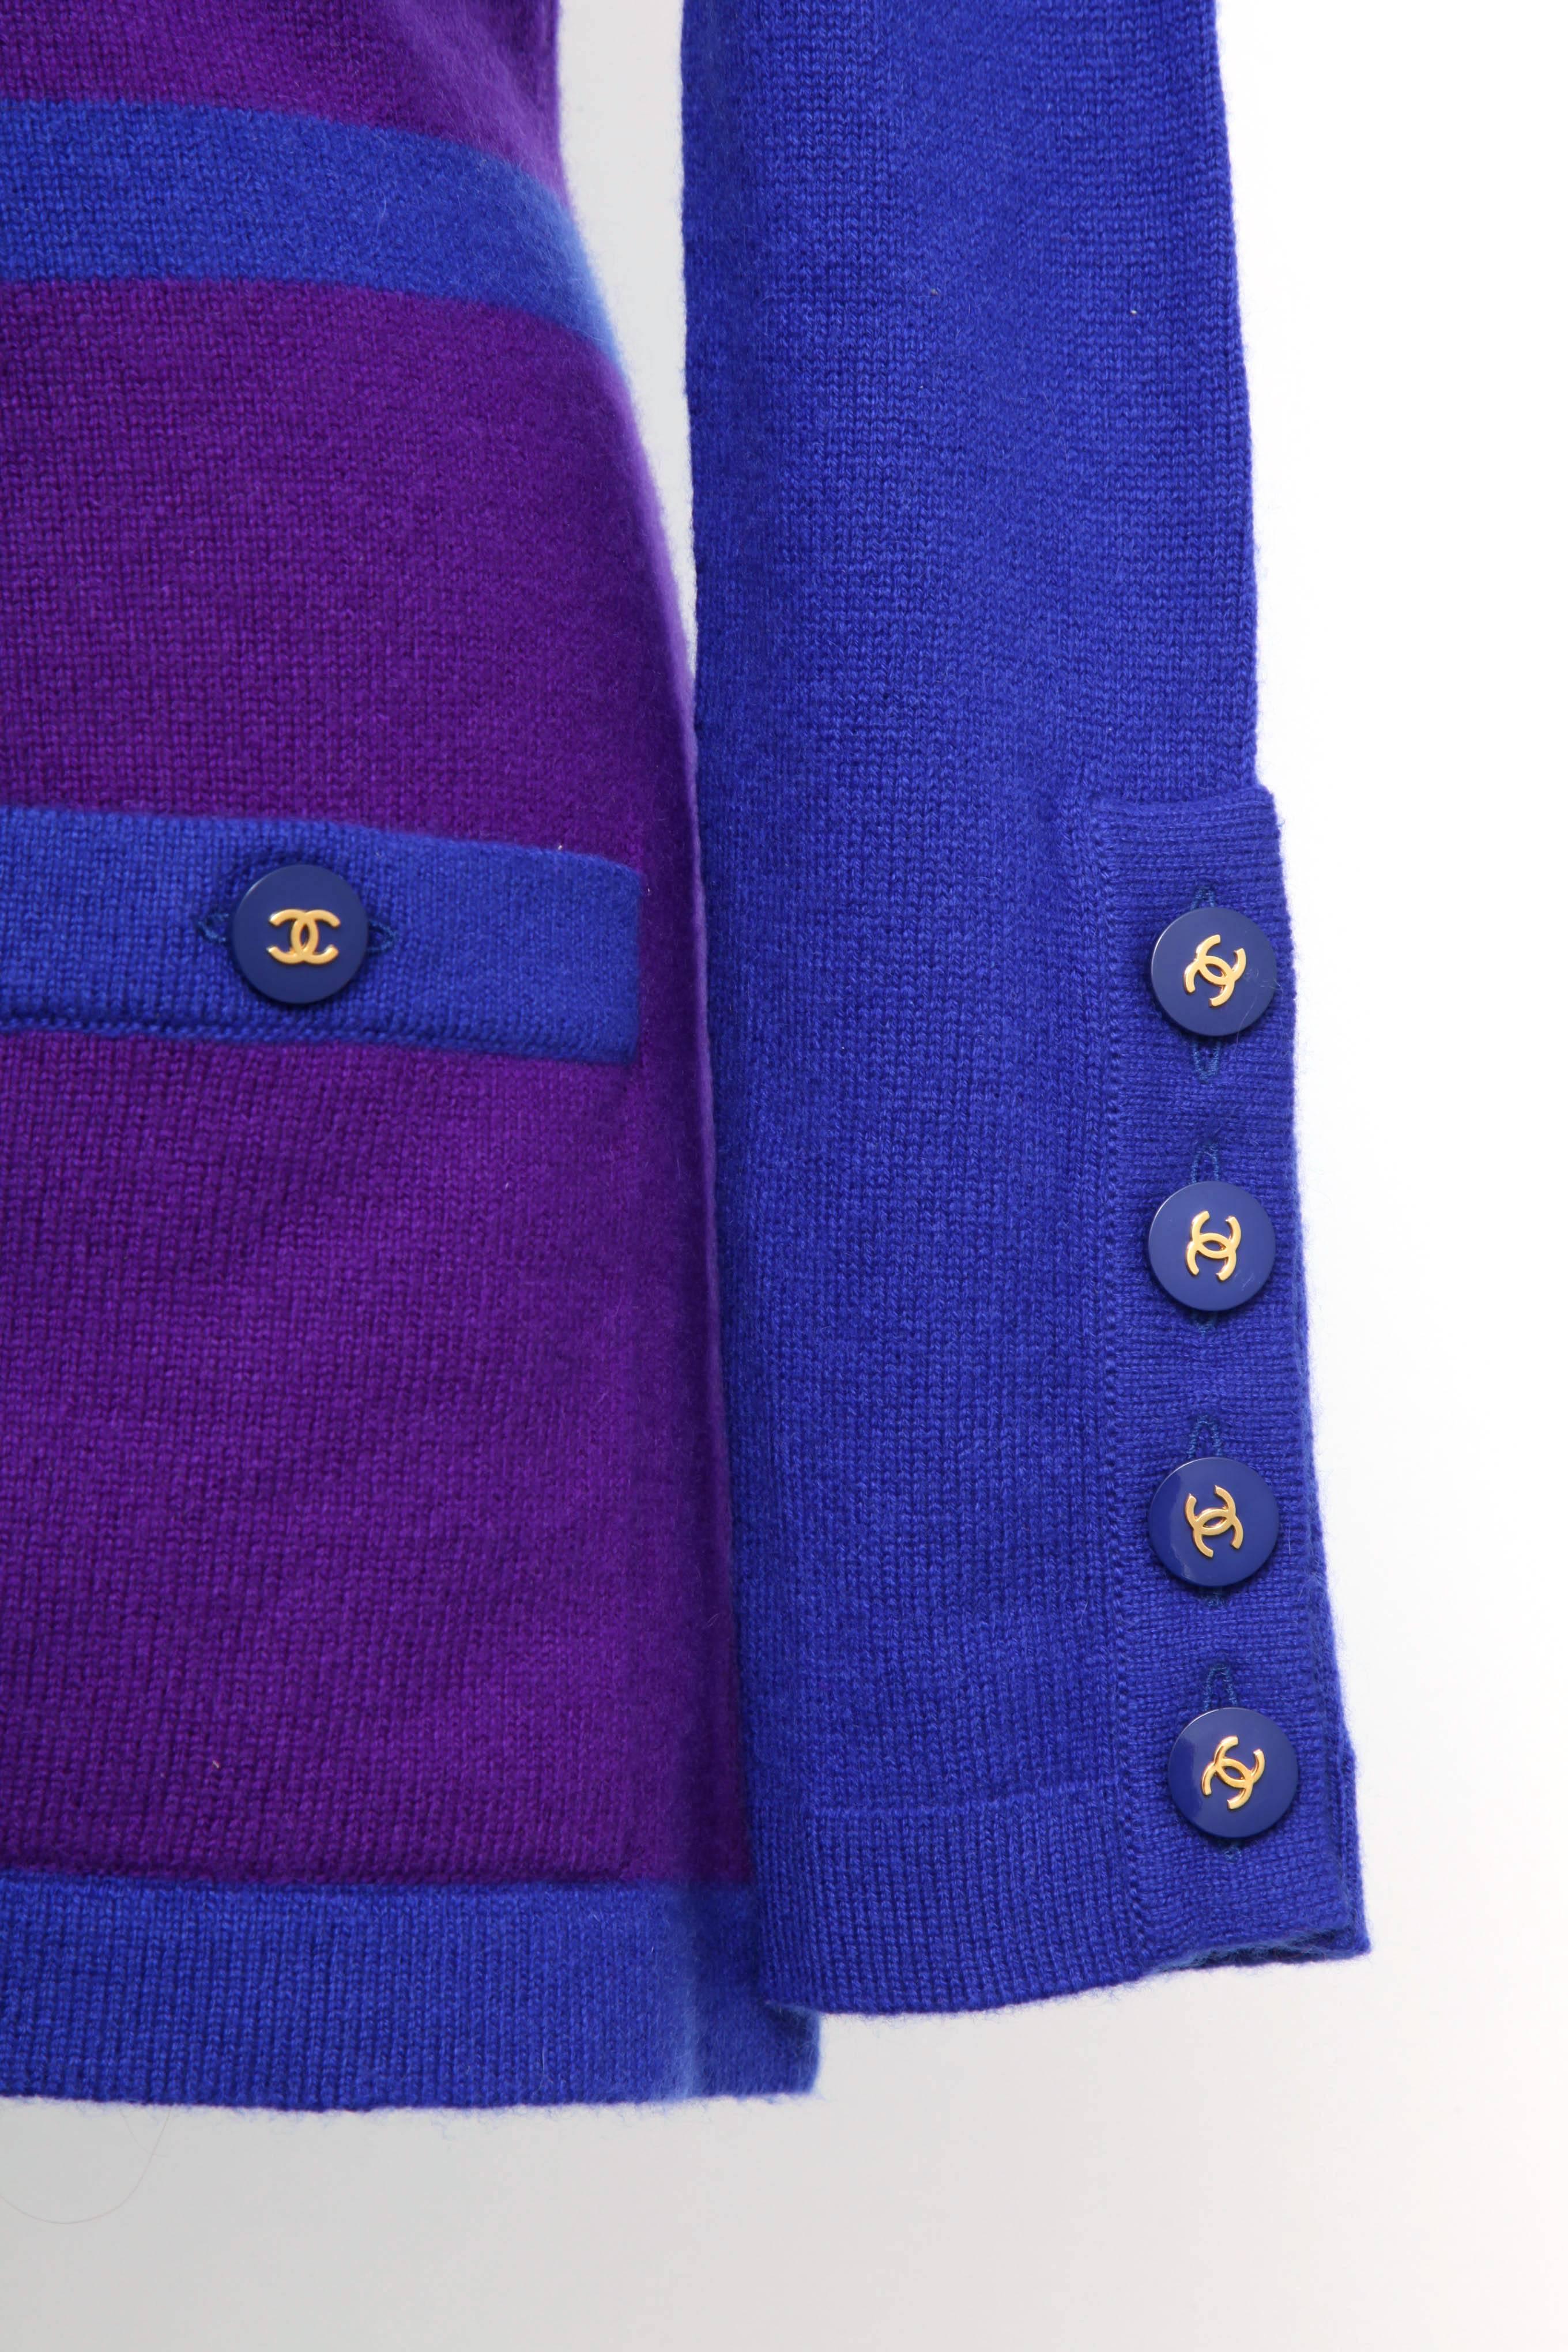 Chanel Cashmere Cardigan Sweater with CC Buttons, 1990s In Excellent Condition For Sale In Chicago, IL